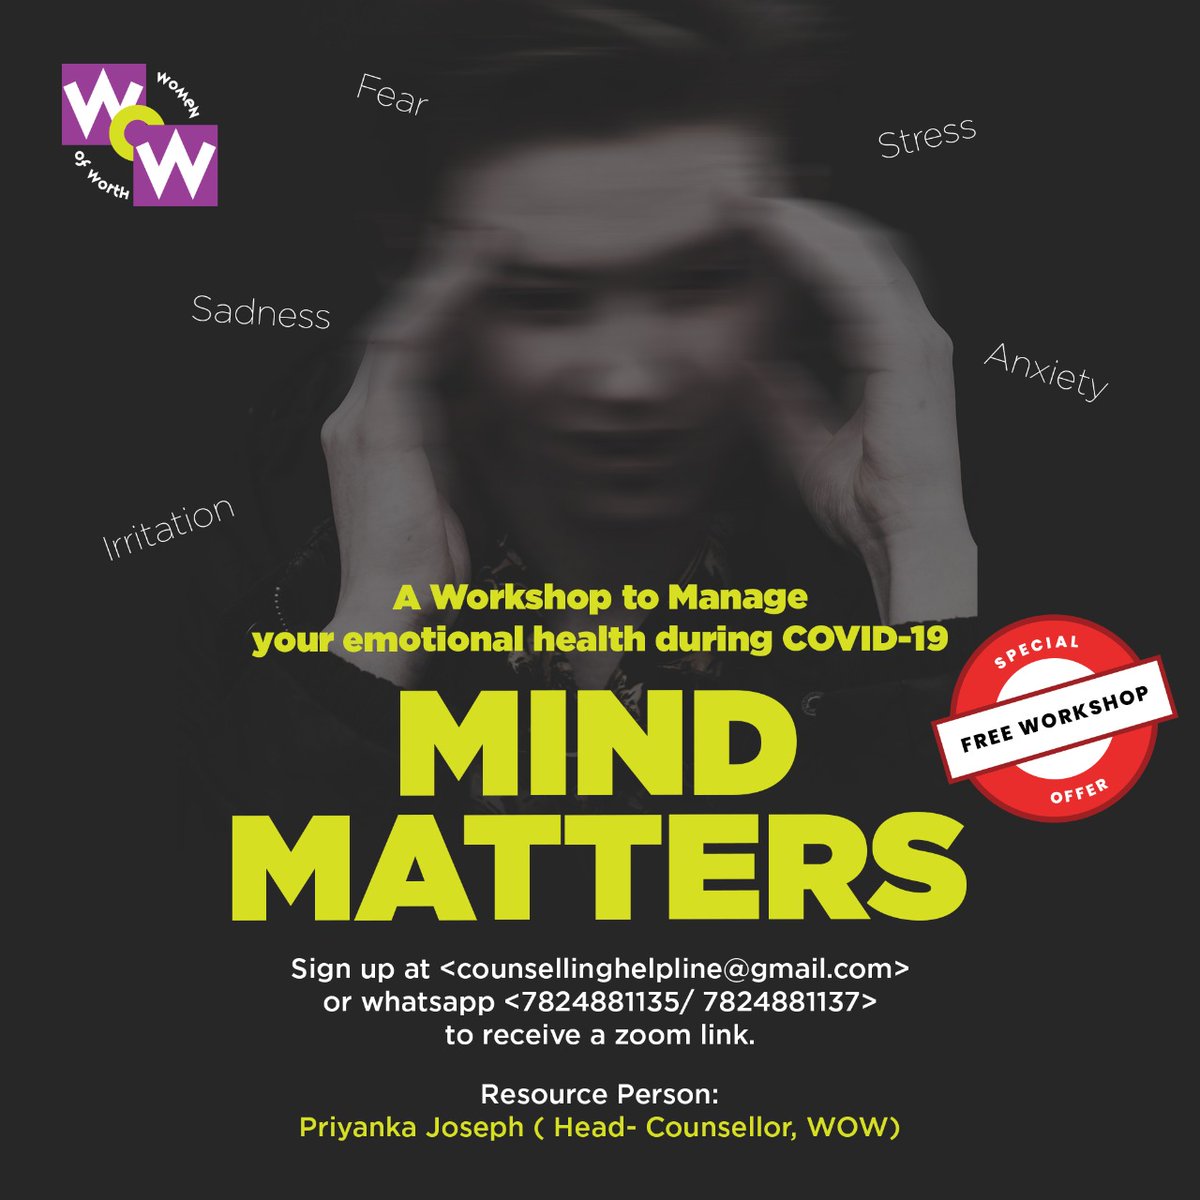 WOW presents MIND Matters- an interactive workshop to manage your emotional health. For Who: 18-25yrs (students, all workers (paid , unpaid), men and women) On 15 April, 2020 To Register: Fill details on t.ly/2OqKN or Email or send sms to receive the Zoom link.